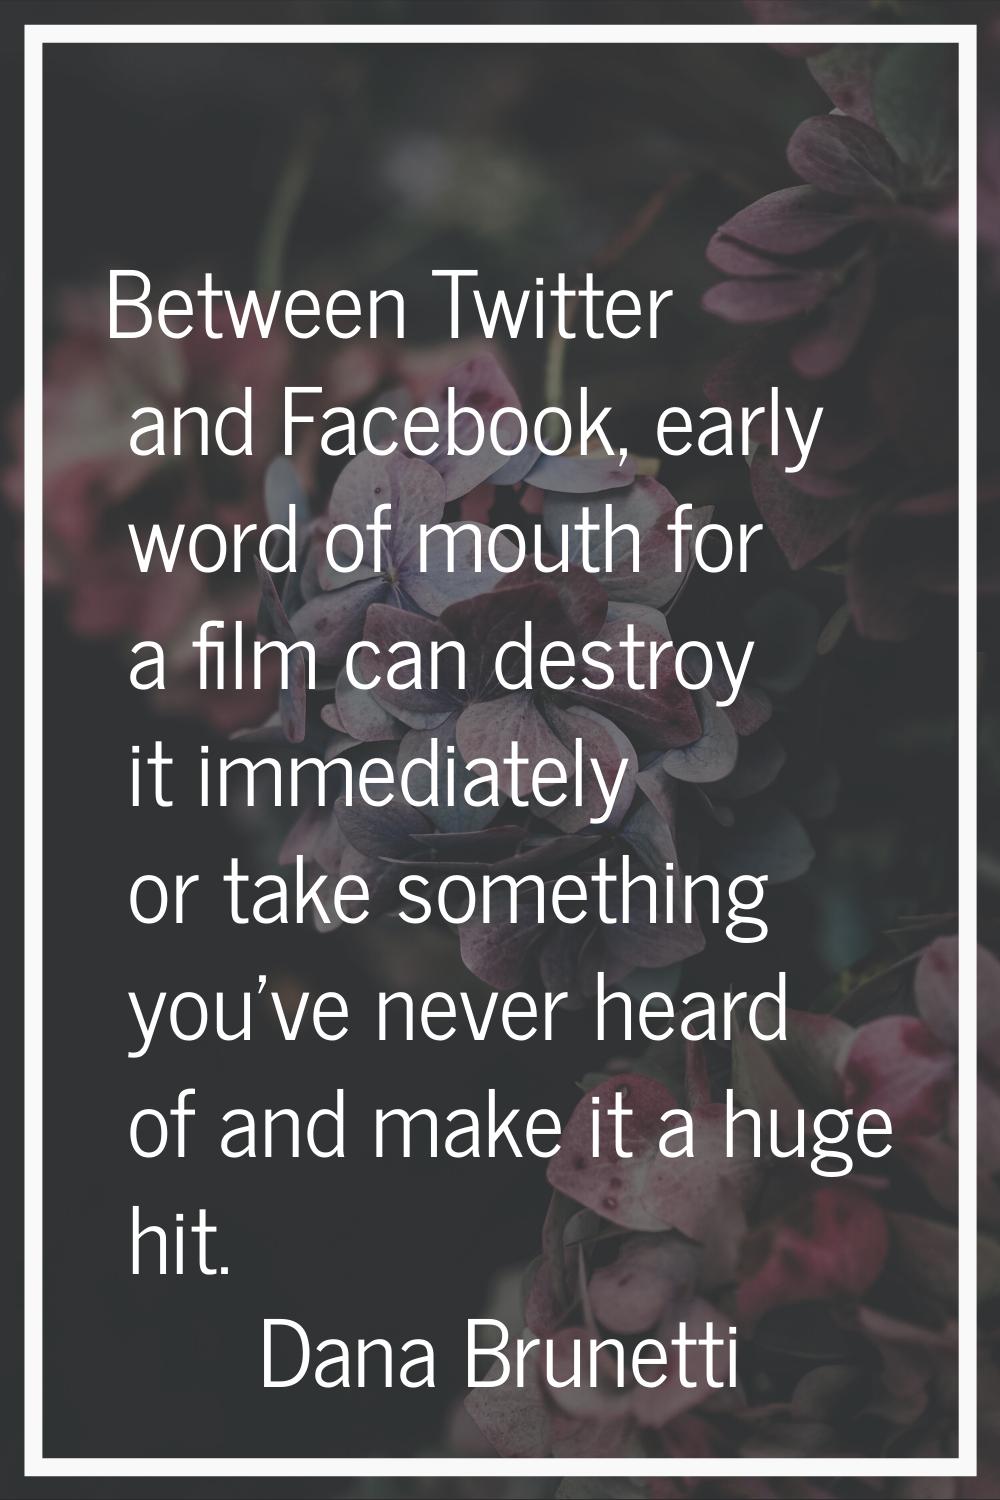 Between Twitter and Facebook, early word of mouth for a film can destroy it immediately or take som